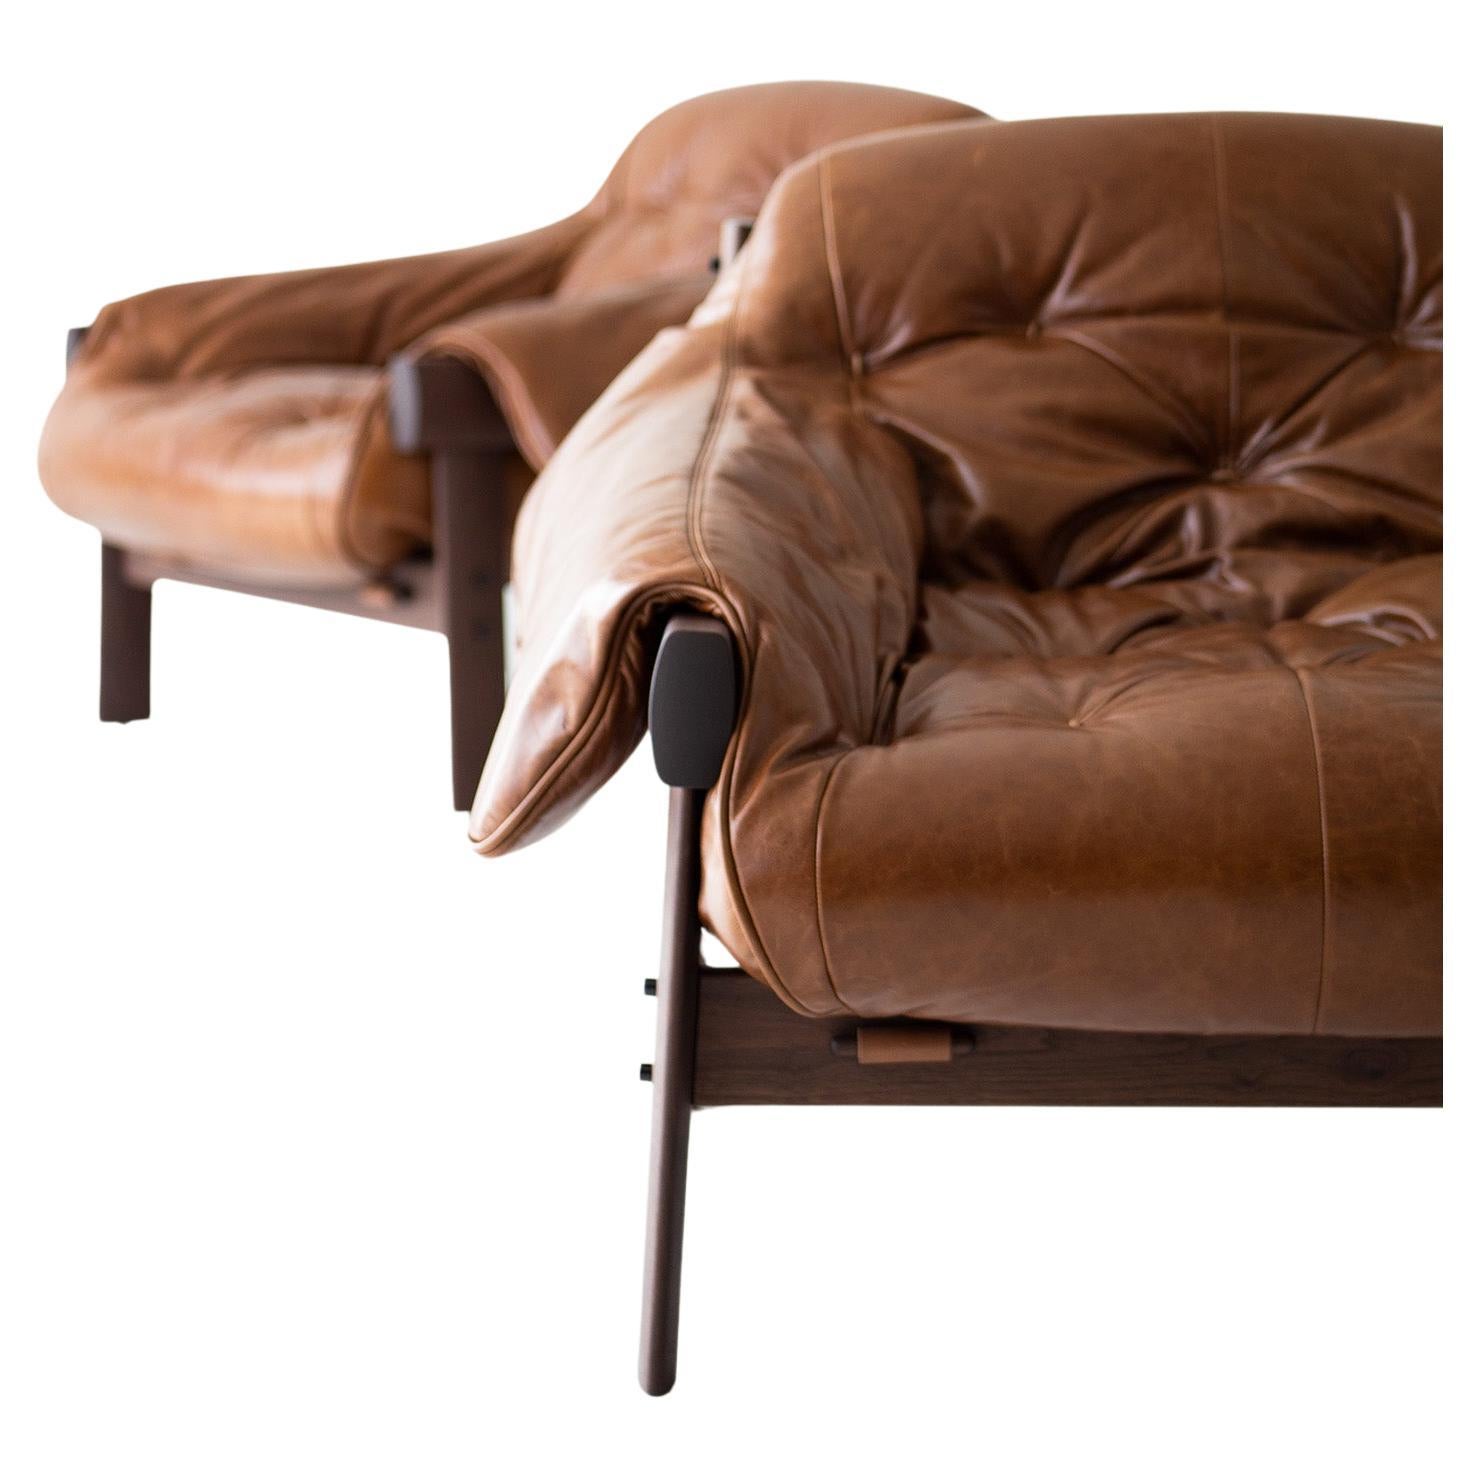 Craft Lounge Chairs, Lafer Lounge Chairs, Brown Leather and Walnut, Modern